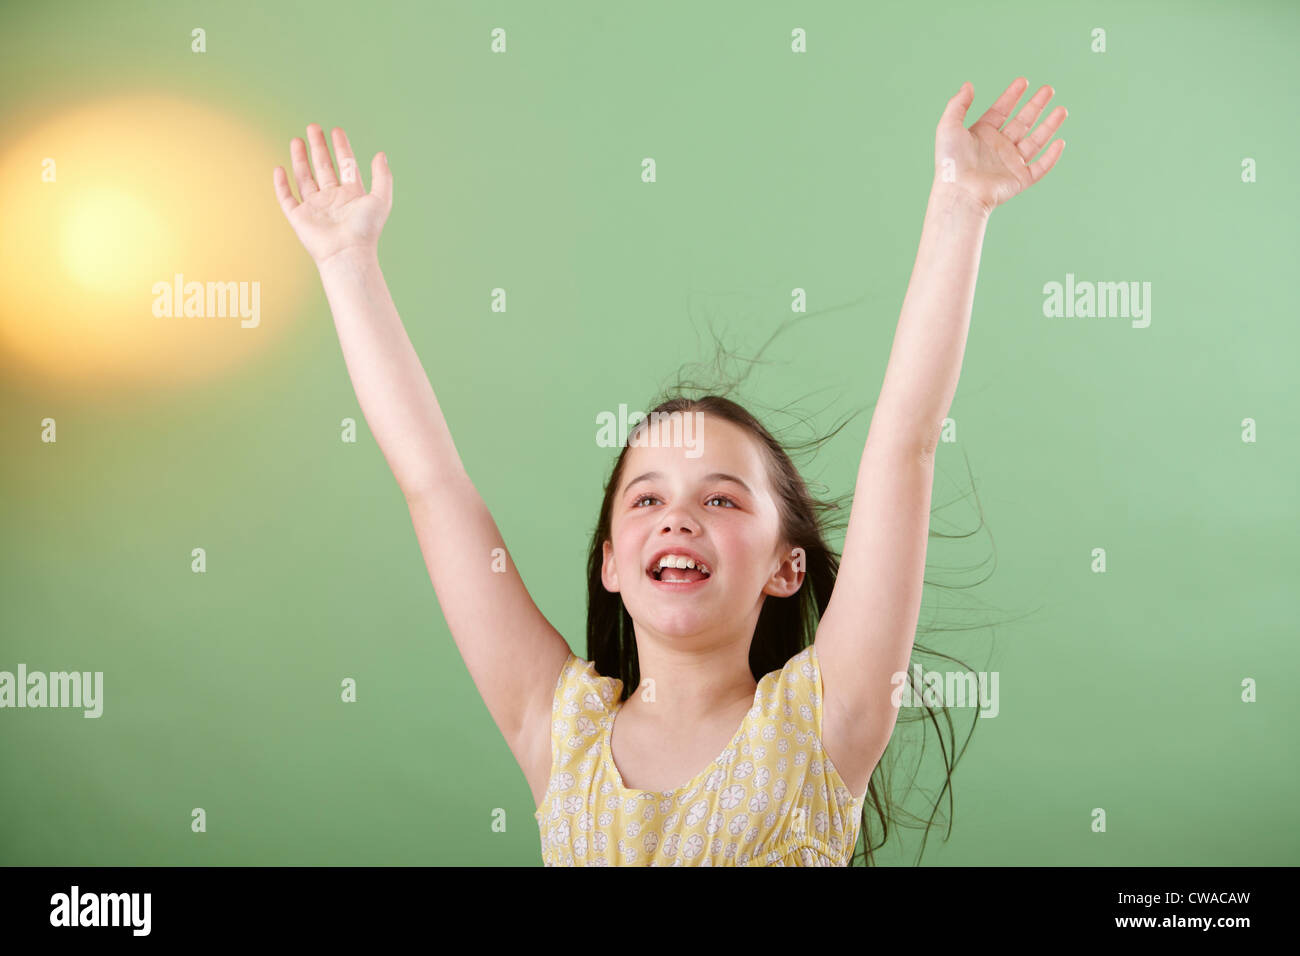 Girl with arms raised Stock Photo